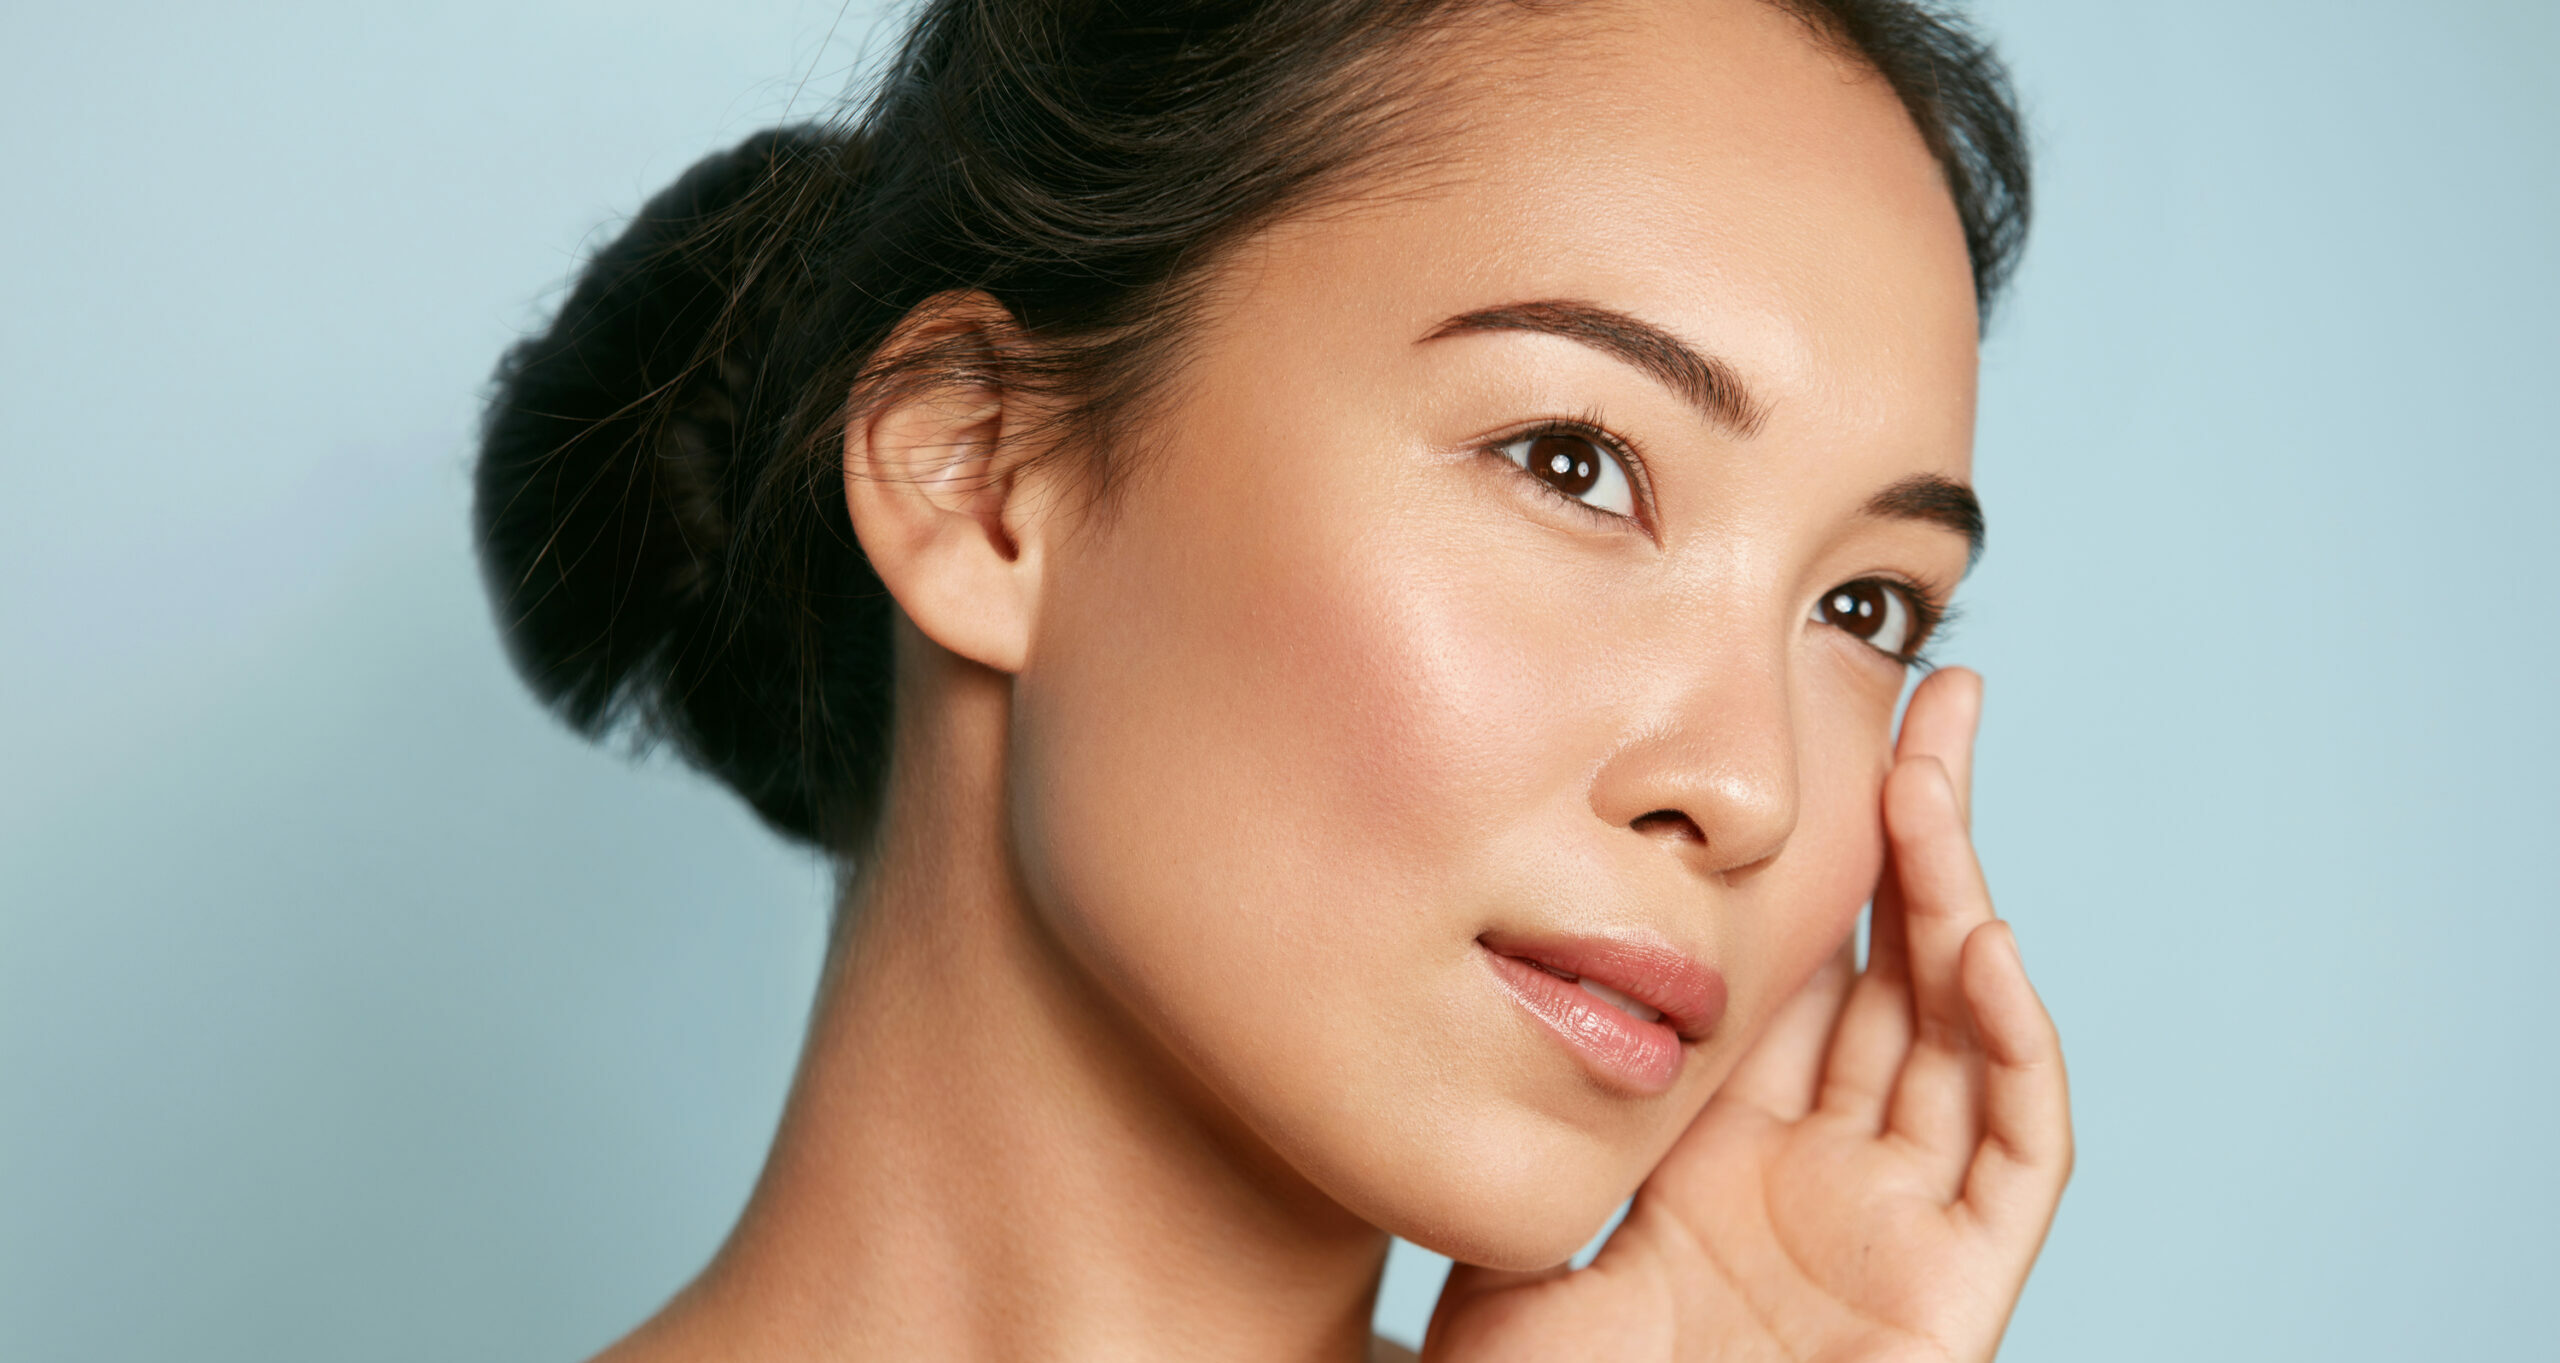 Dark circles under the eyes Causes, treatment options, and more